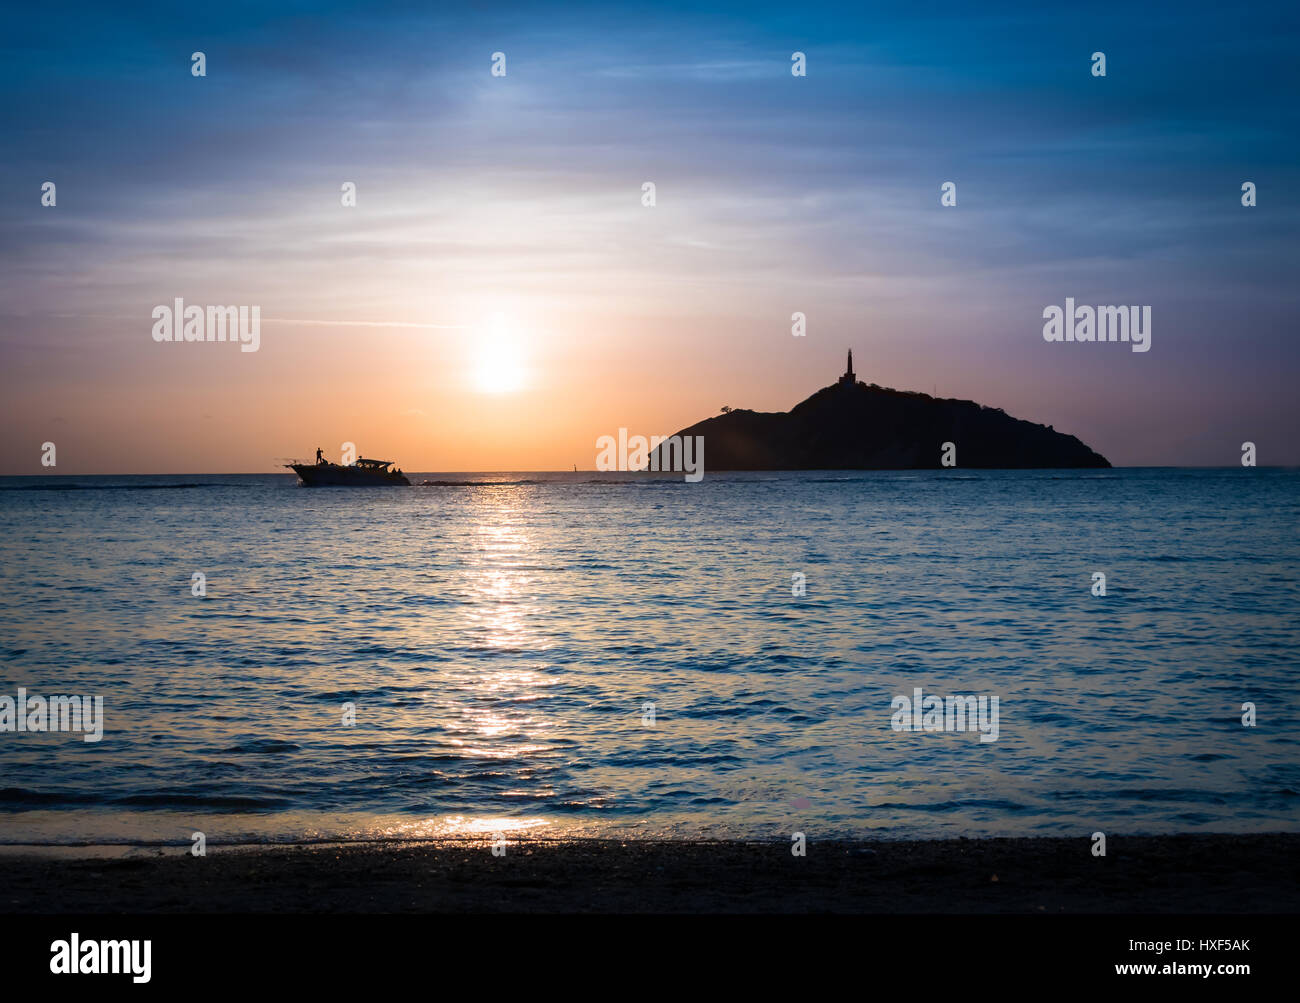 Sunset view of a lighthouse in an island - Santa Marta, Colombia Stock Photo